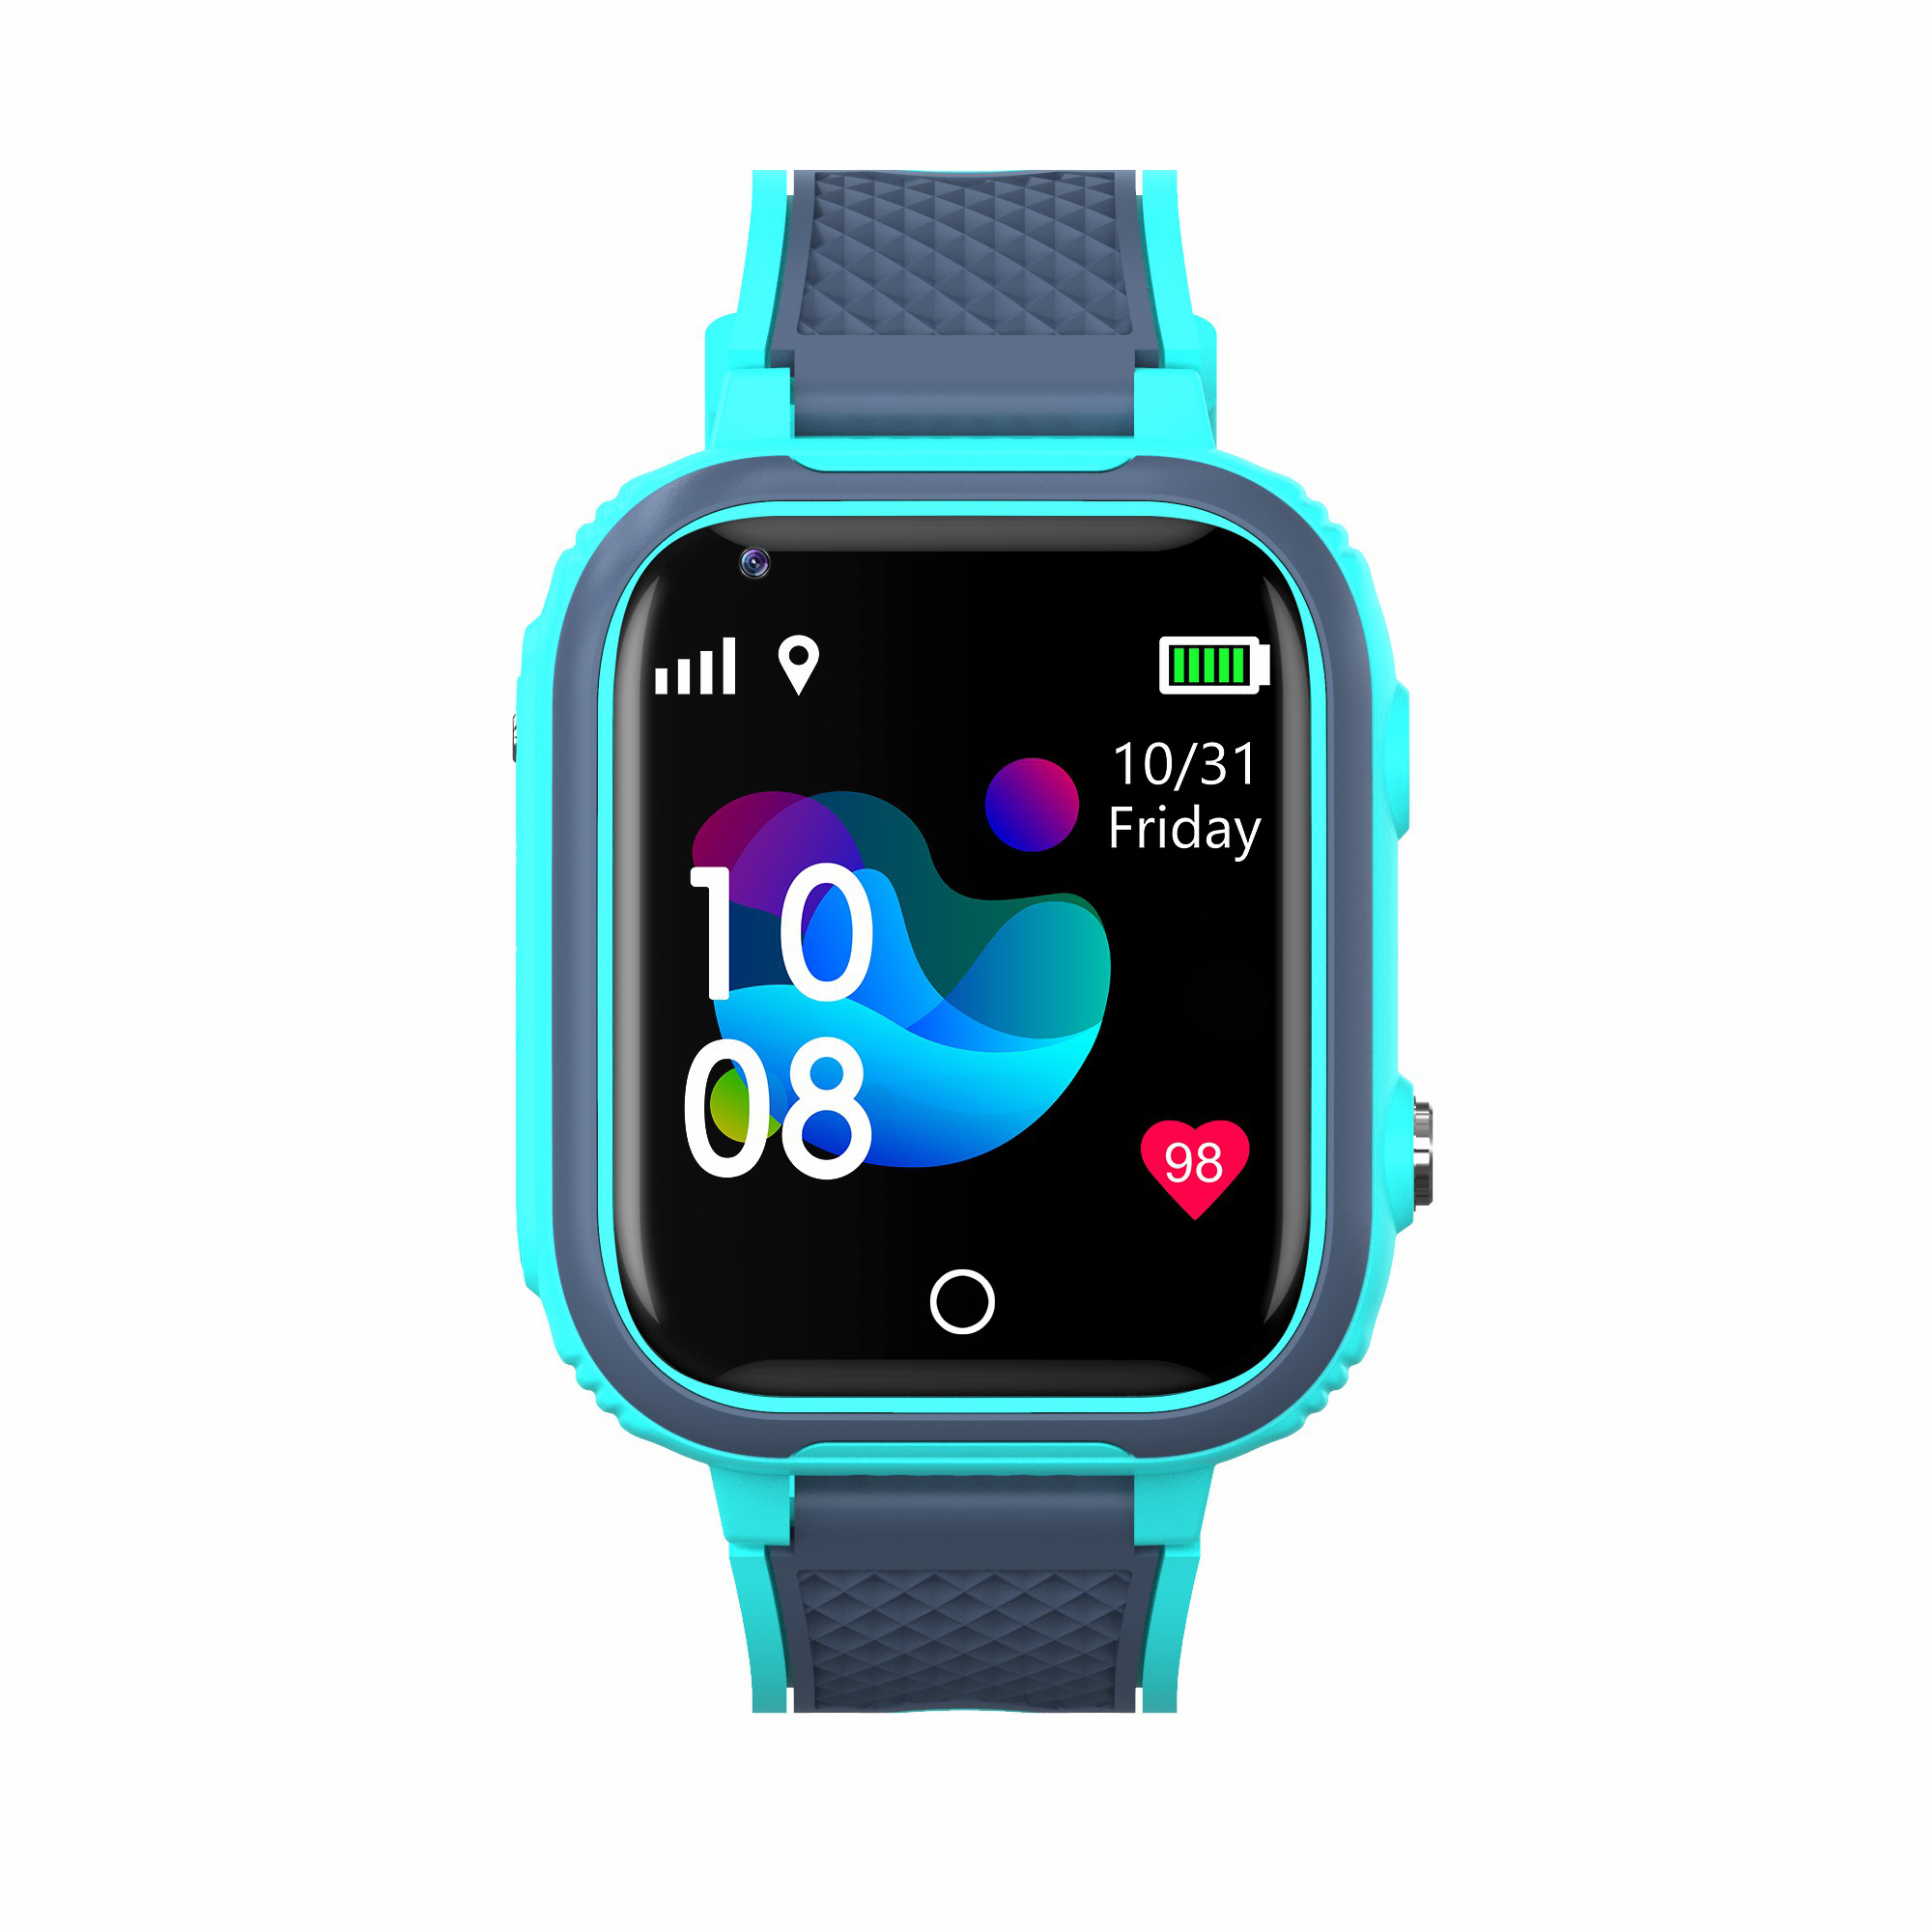 China Manufacture 4G IP67 Waterproof Accurate Positioning Video Call Safety SOS Emergency Help Smart Watch GPS Tracker with SIM Card Slot D53